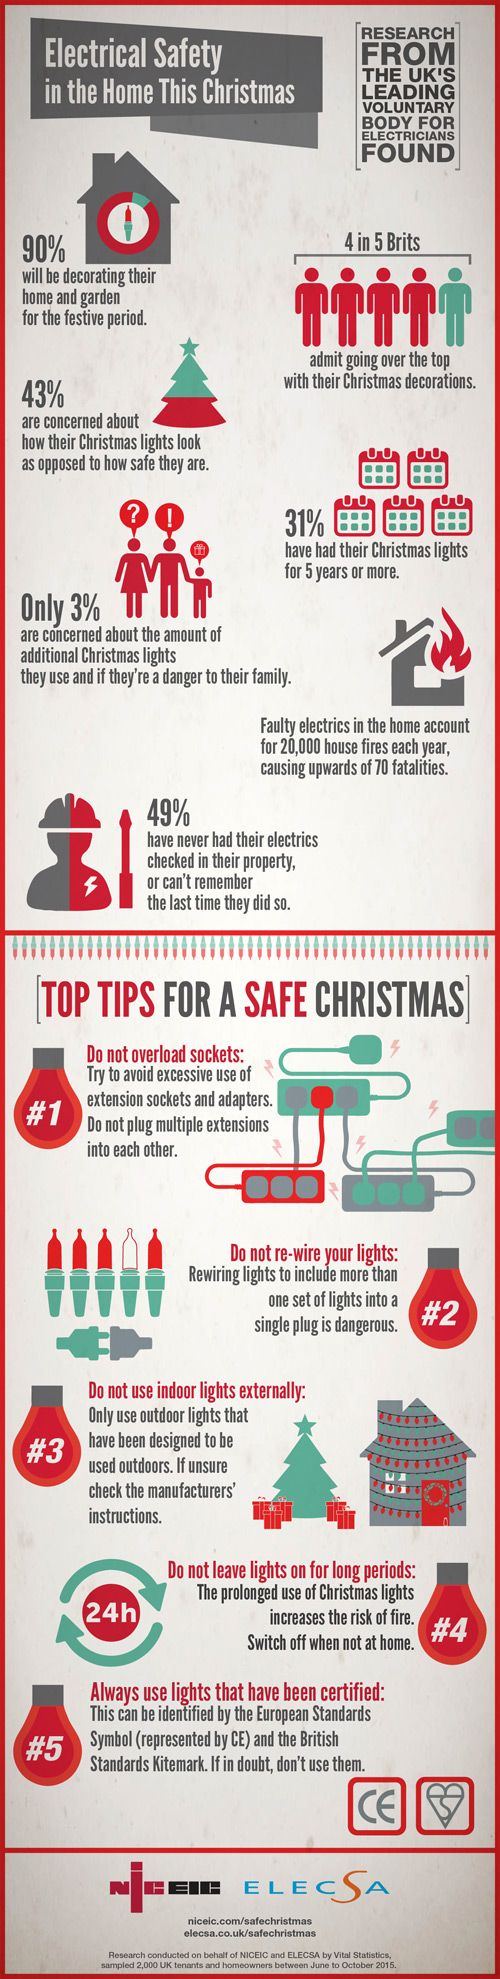 Electrical safety this Christmas